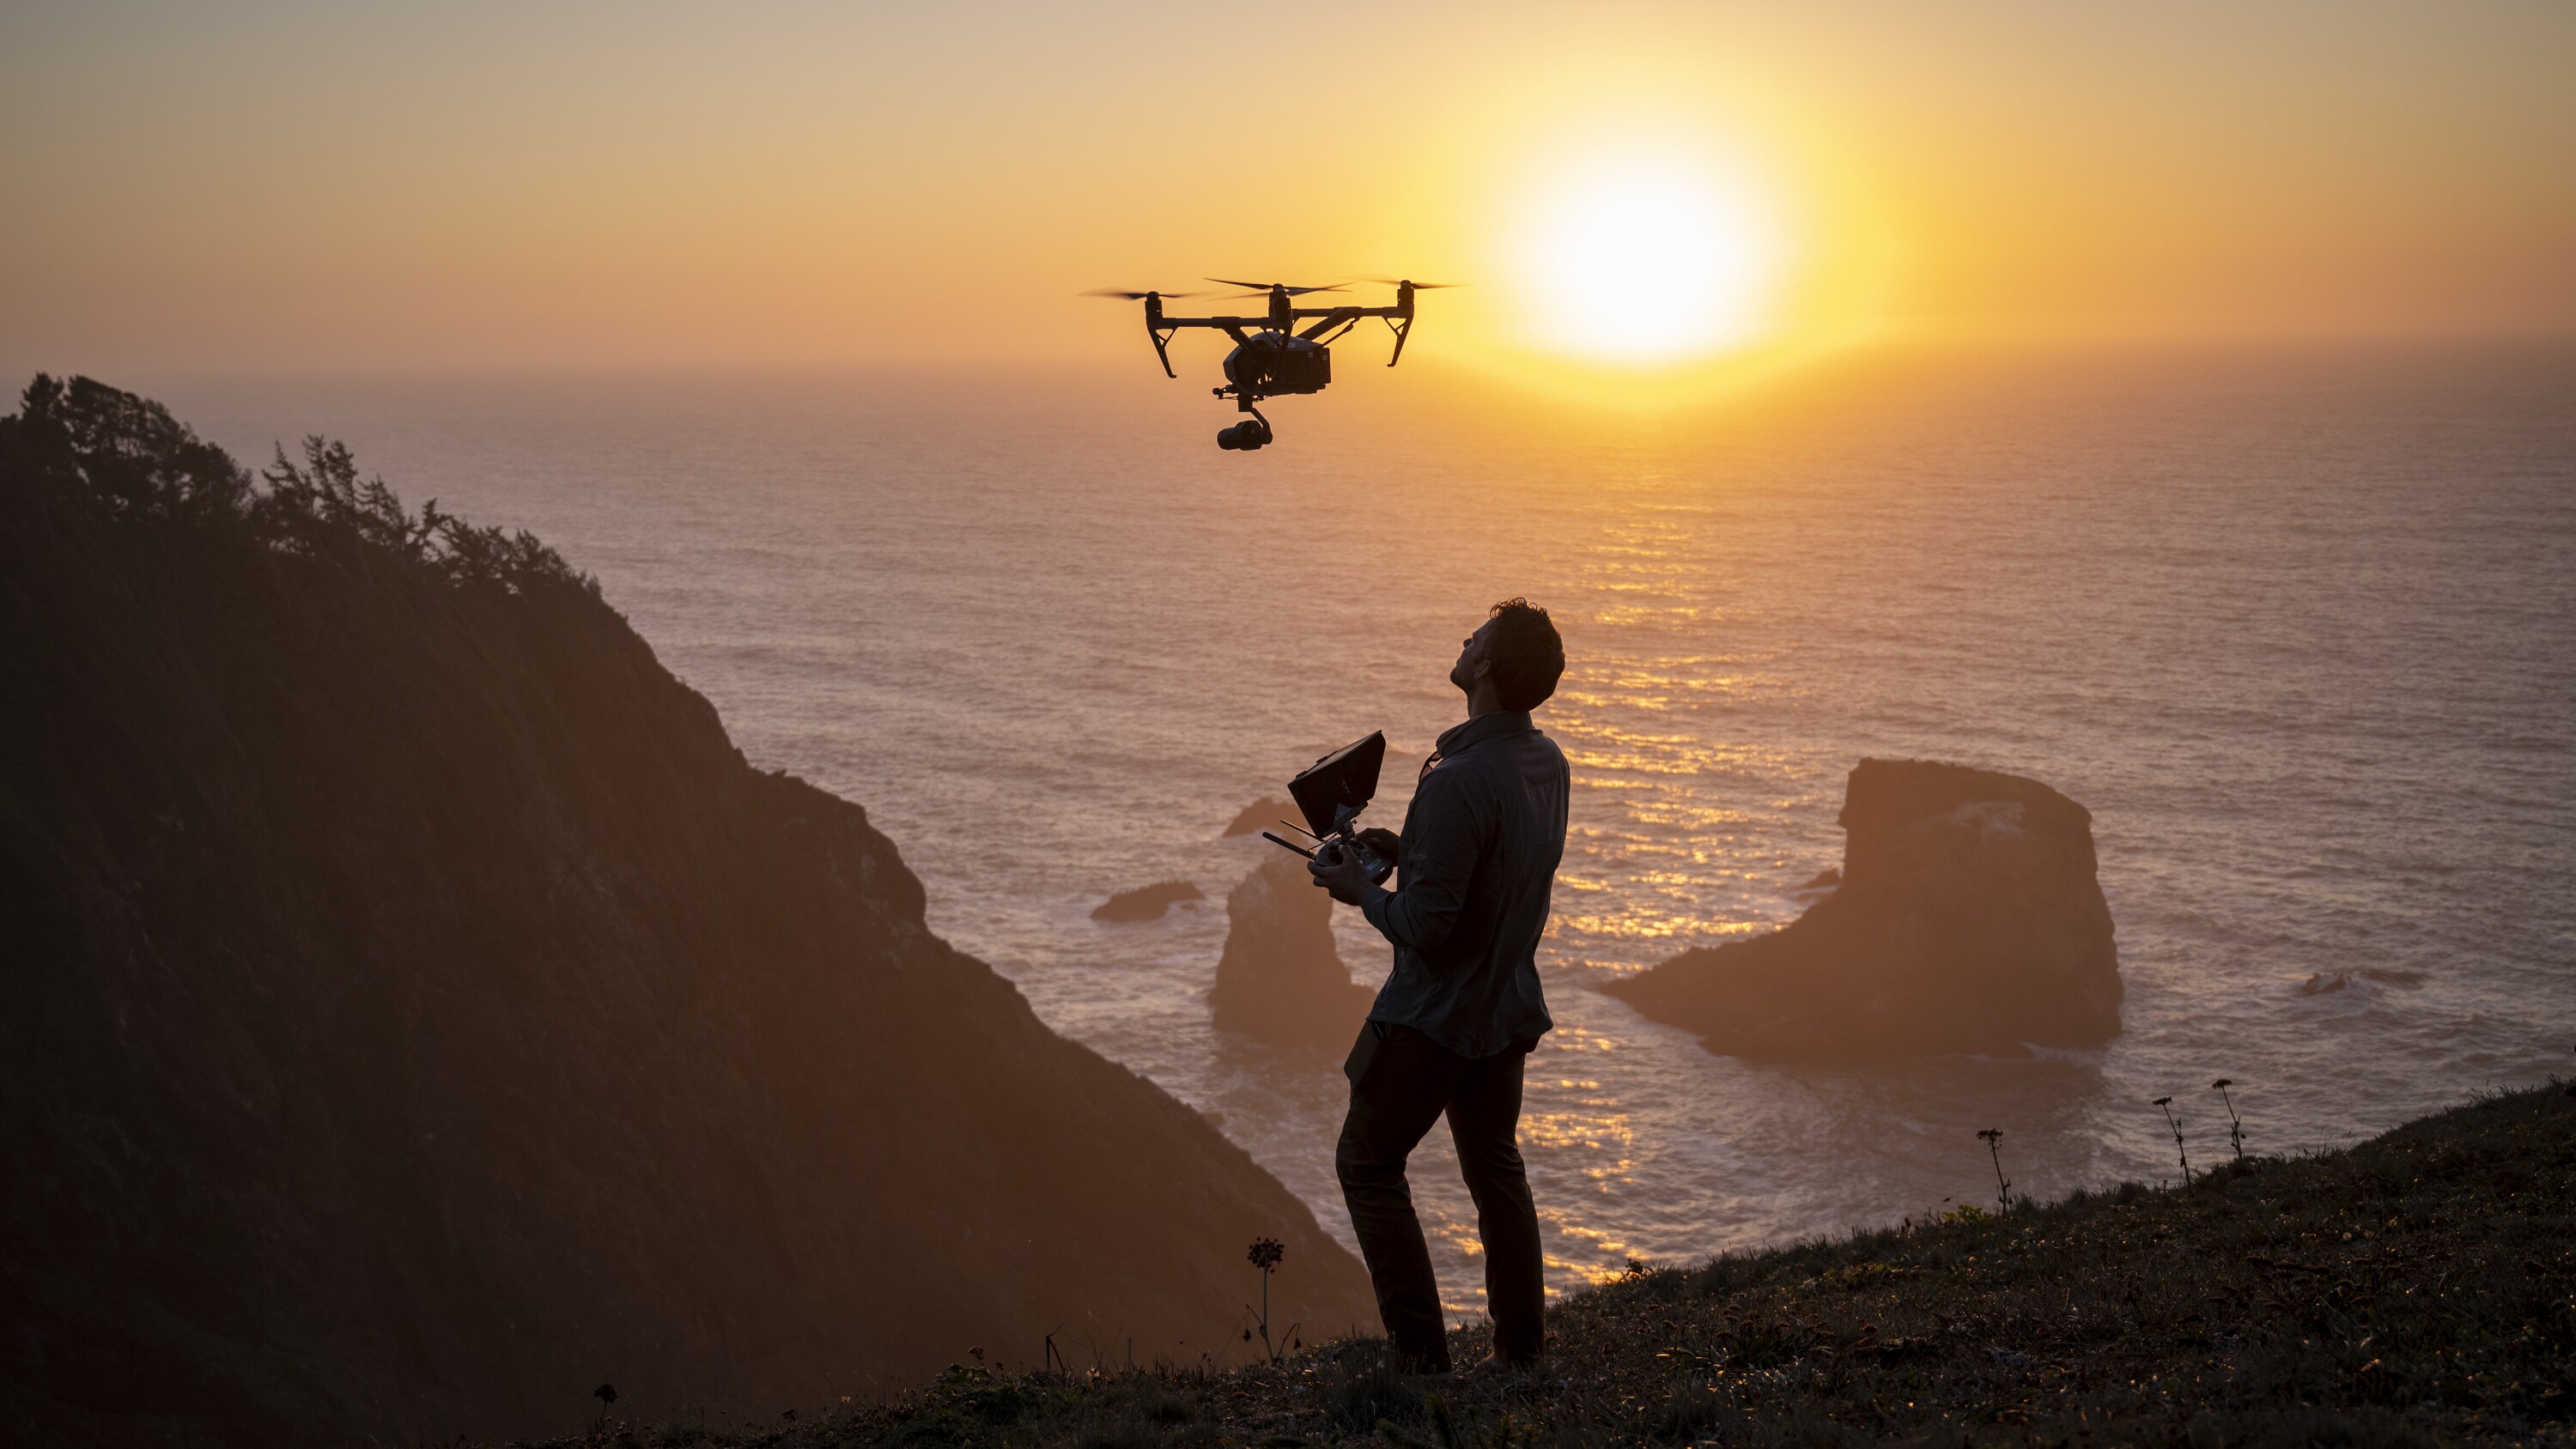 Drone pilot Jeff Hester captures the golden light along the rugged coastline that salmon have to navigate before facing hoards of sea lions at the river mouth. (National Geographic for Disney+/Taylor Gray)